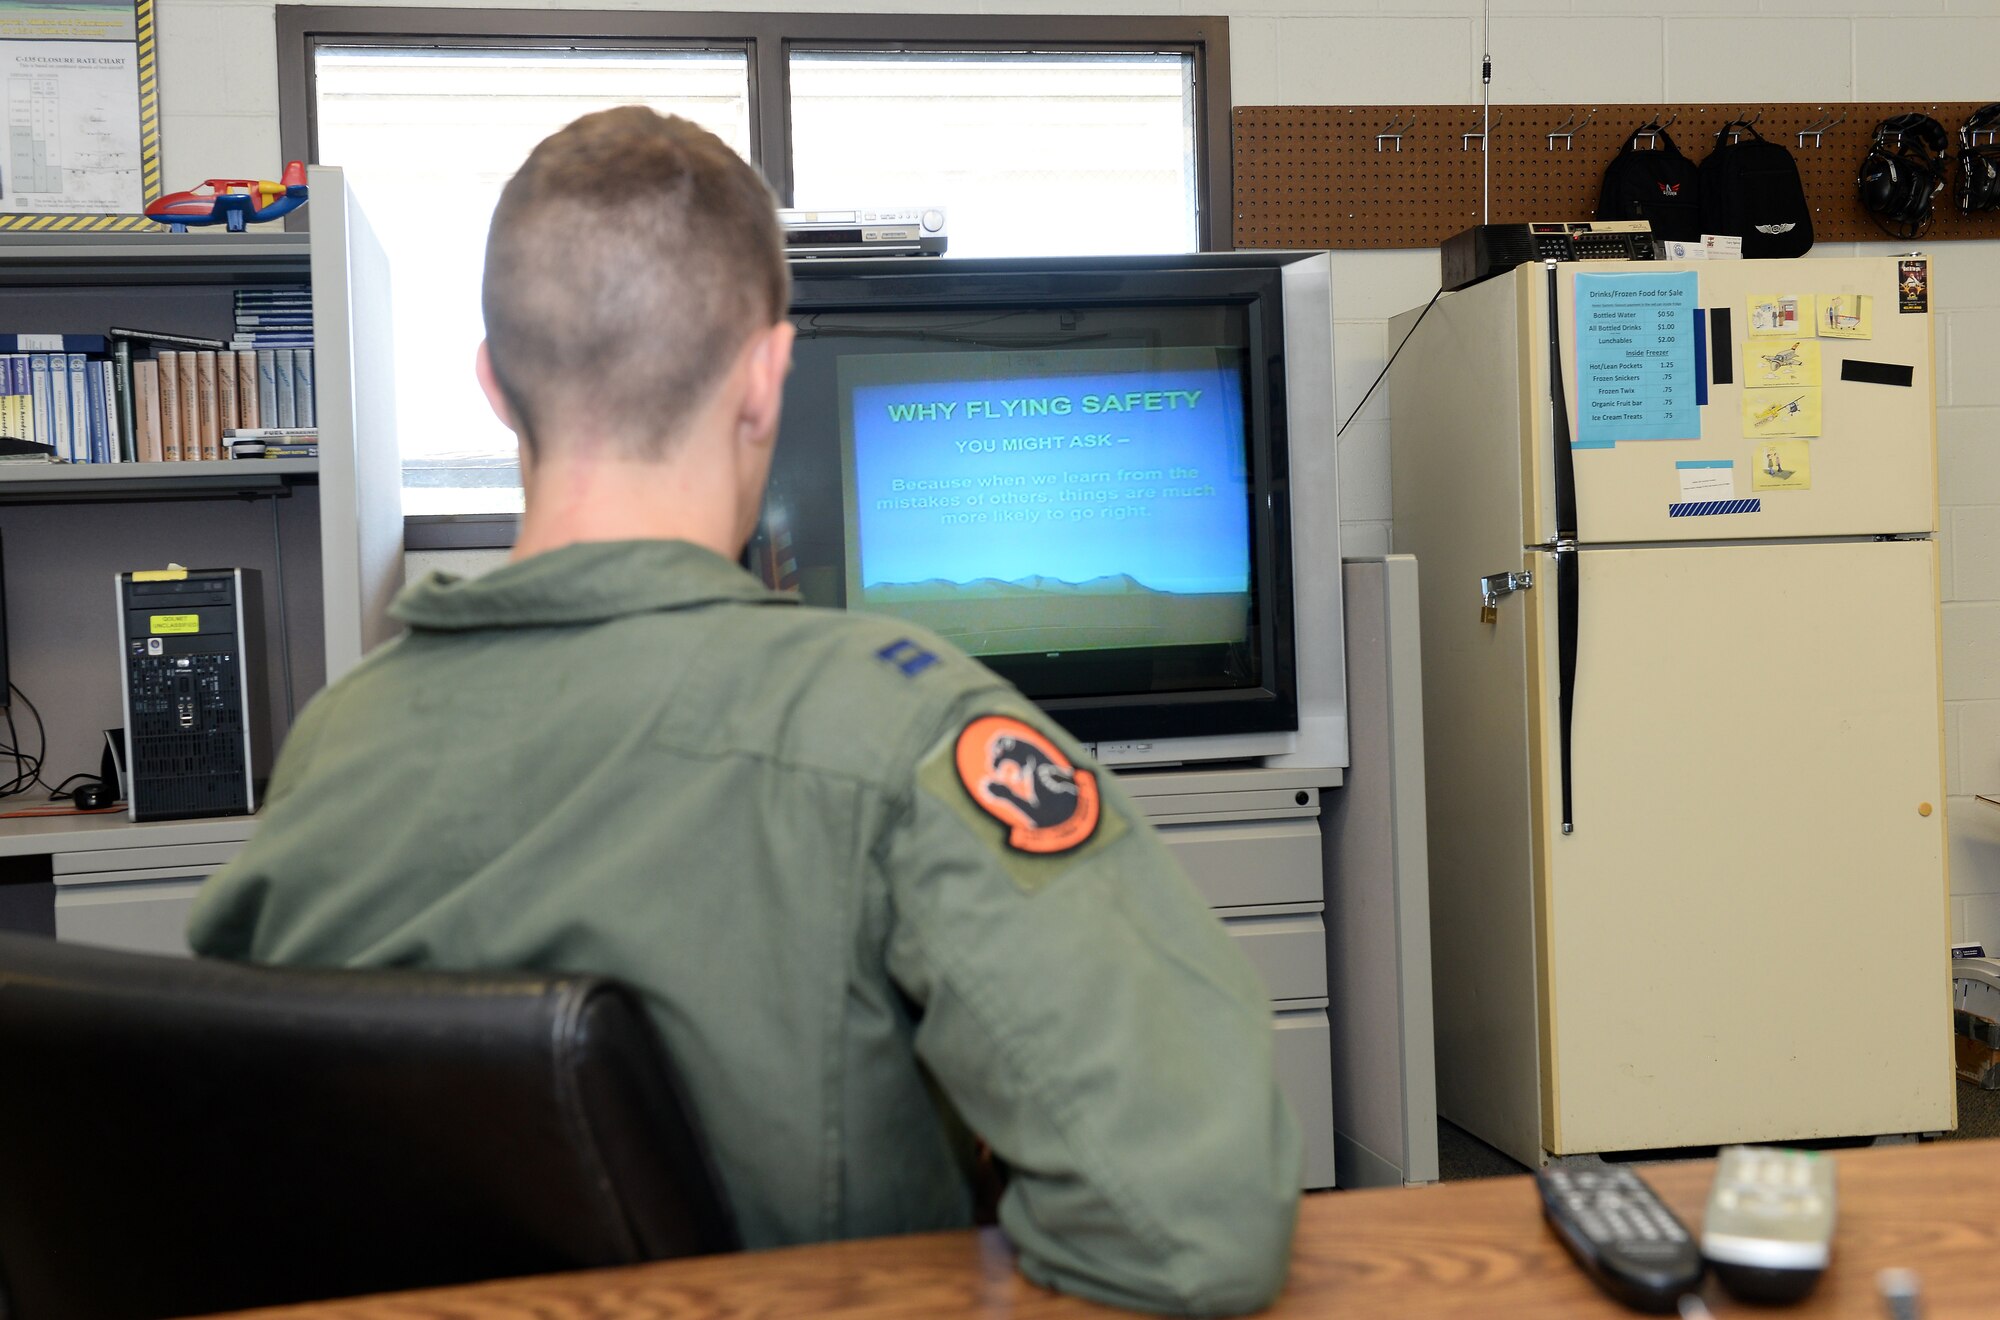 U.S. Air Force Capt. Adam Sema, 338th Combat Training Squadron student pilot, watches a safety video Sept. 14, 2018, at the LeMay Aero Club on Offutt Air Force Base, Nebraska. The services of the LeMay Aero Club are available free of charge to active-duty, guard or reserve service members, Department of Defense civilians, Department of Homeland Security personnel, family members of these individuals and retirees. The only exemption to this rule is the family members of retirees. (U.S. Air Force photo by Charles J. Haymond)